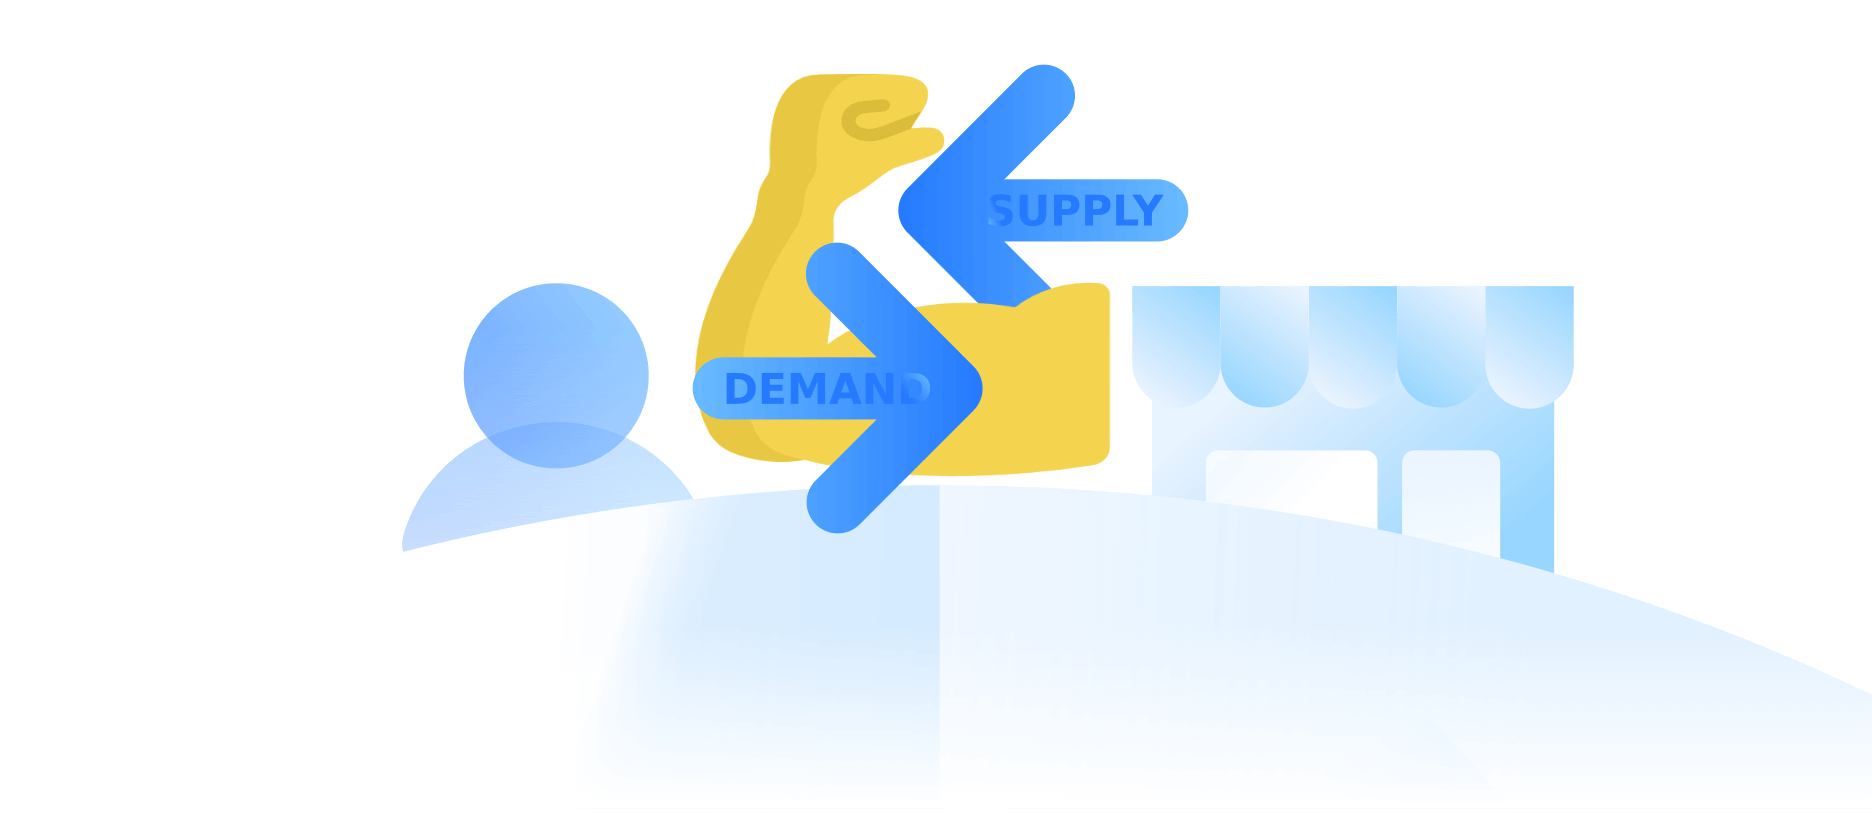 Supply and demand on Apify Marketplace